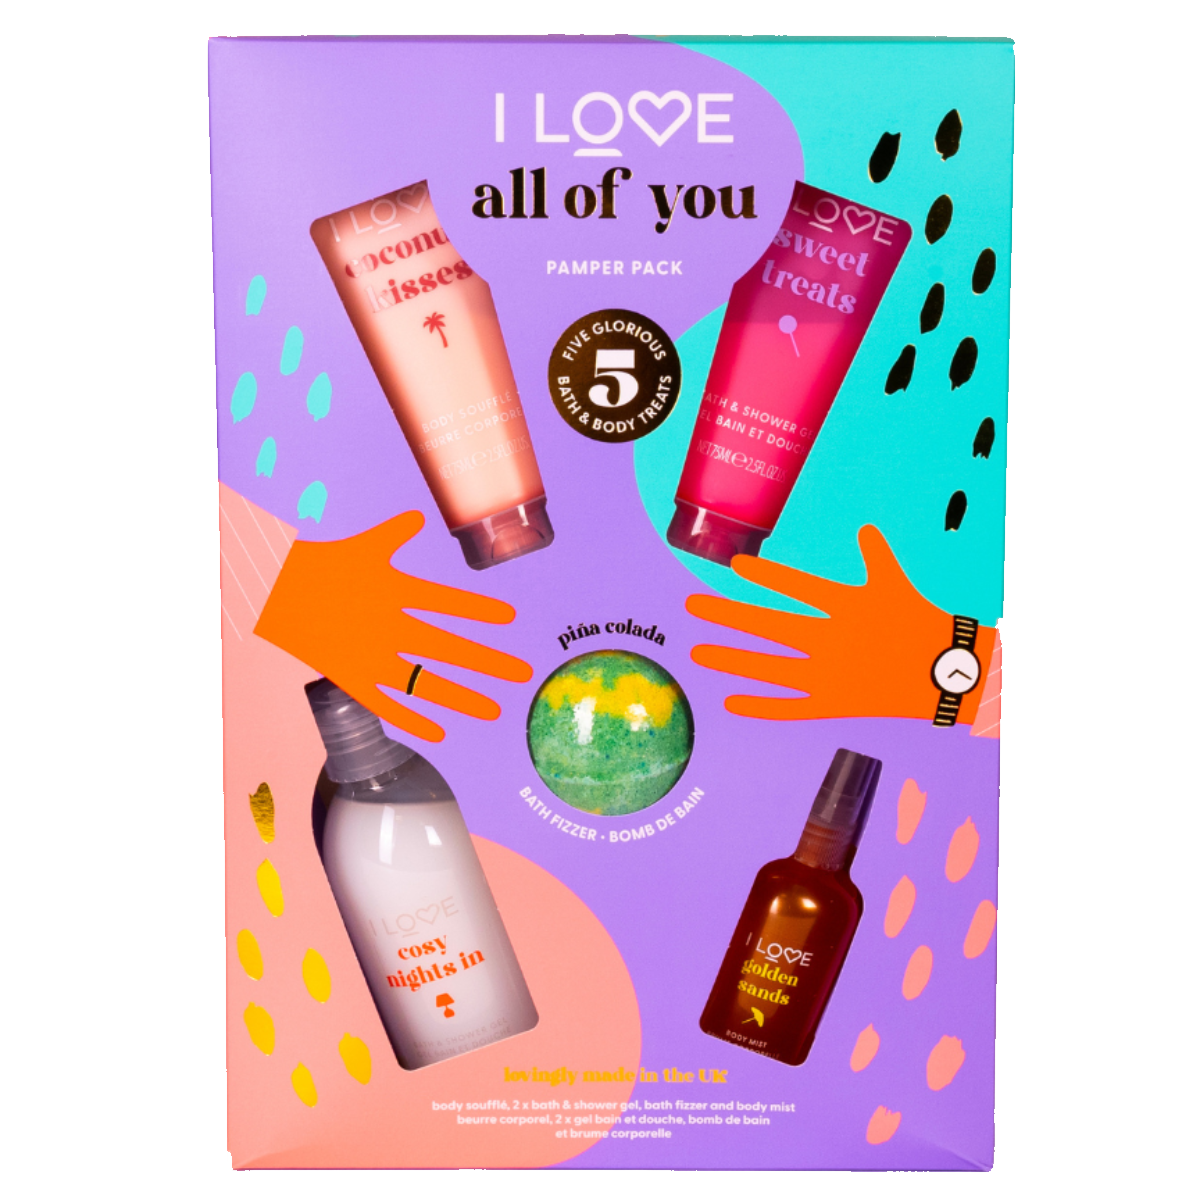 I Love All of You Beauty and Fragrance Gift Set Image 1